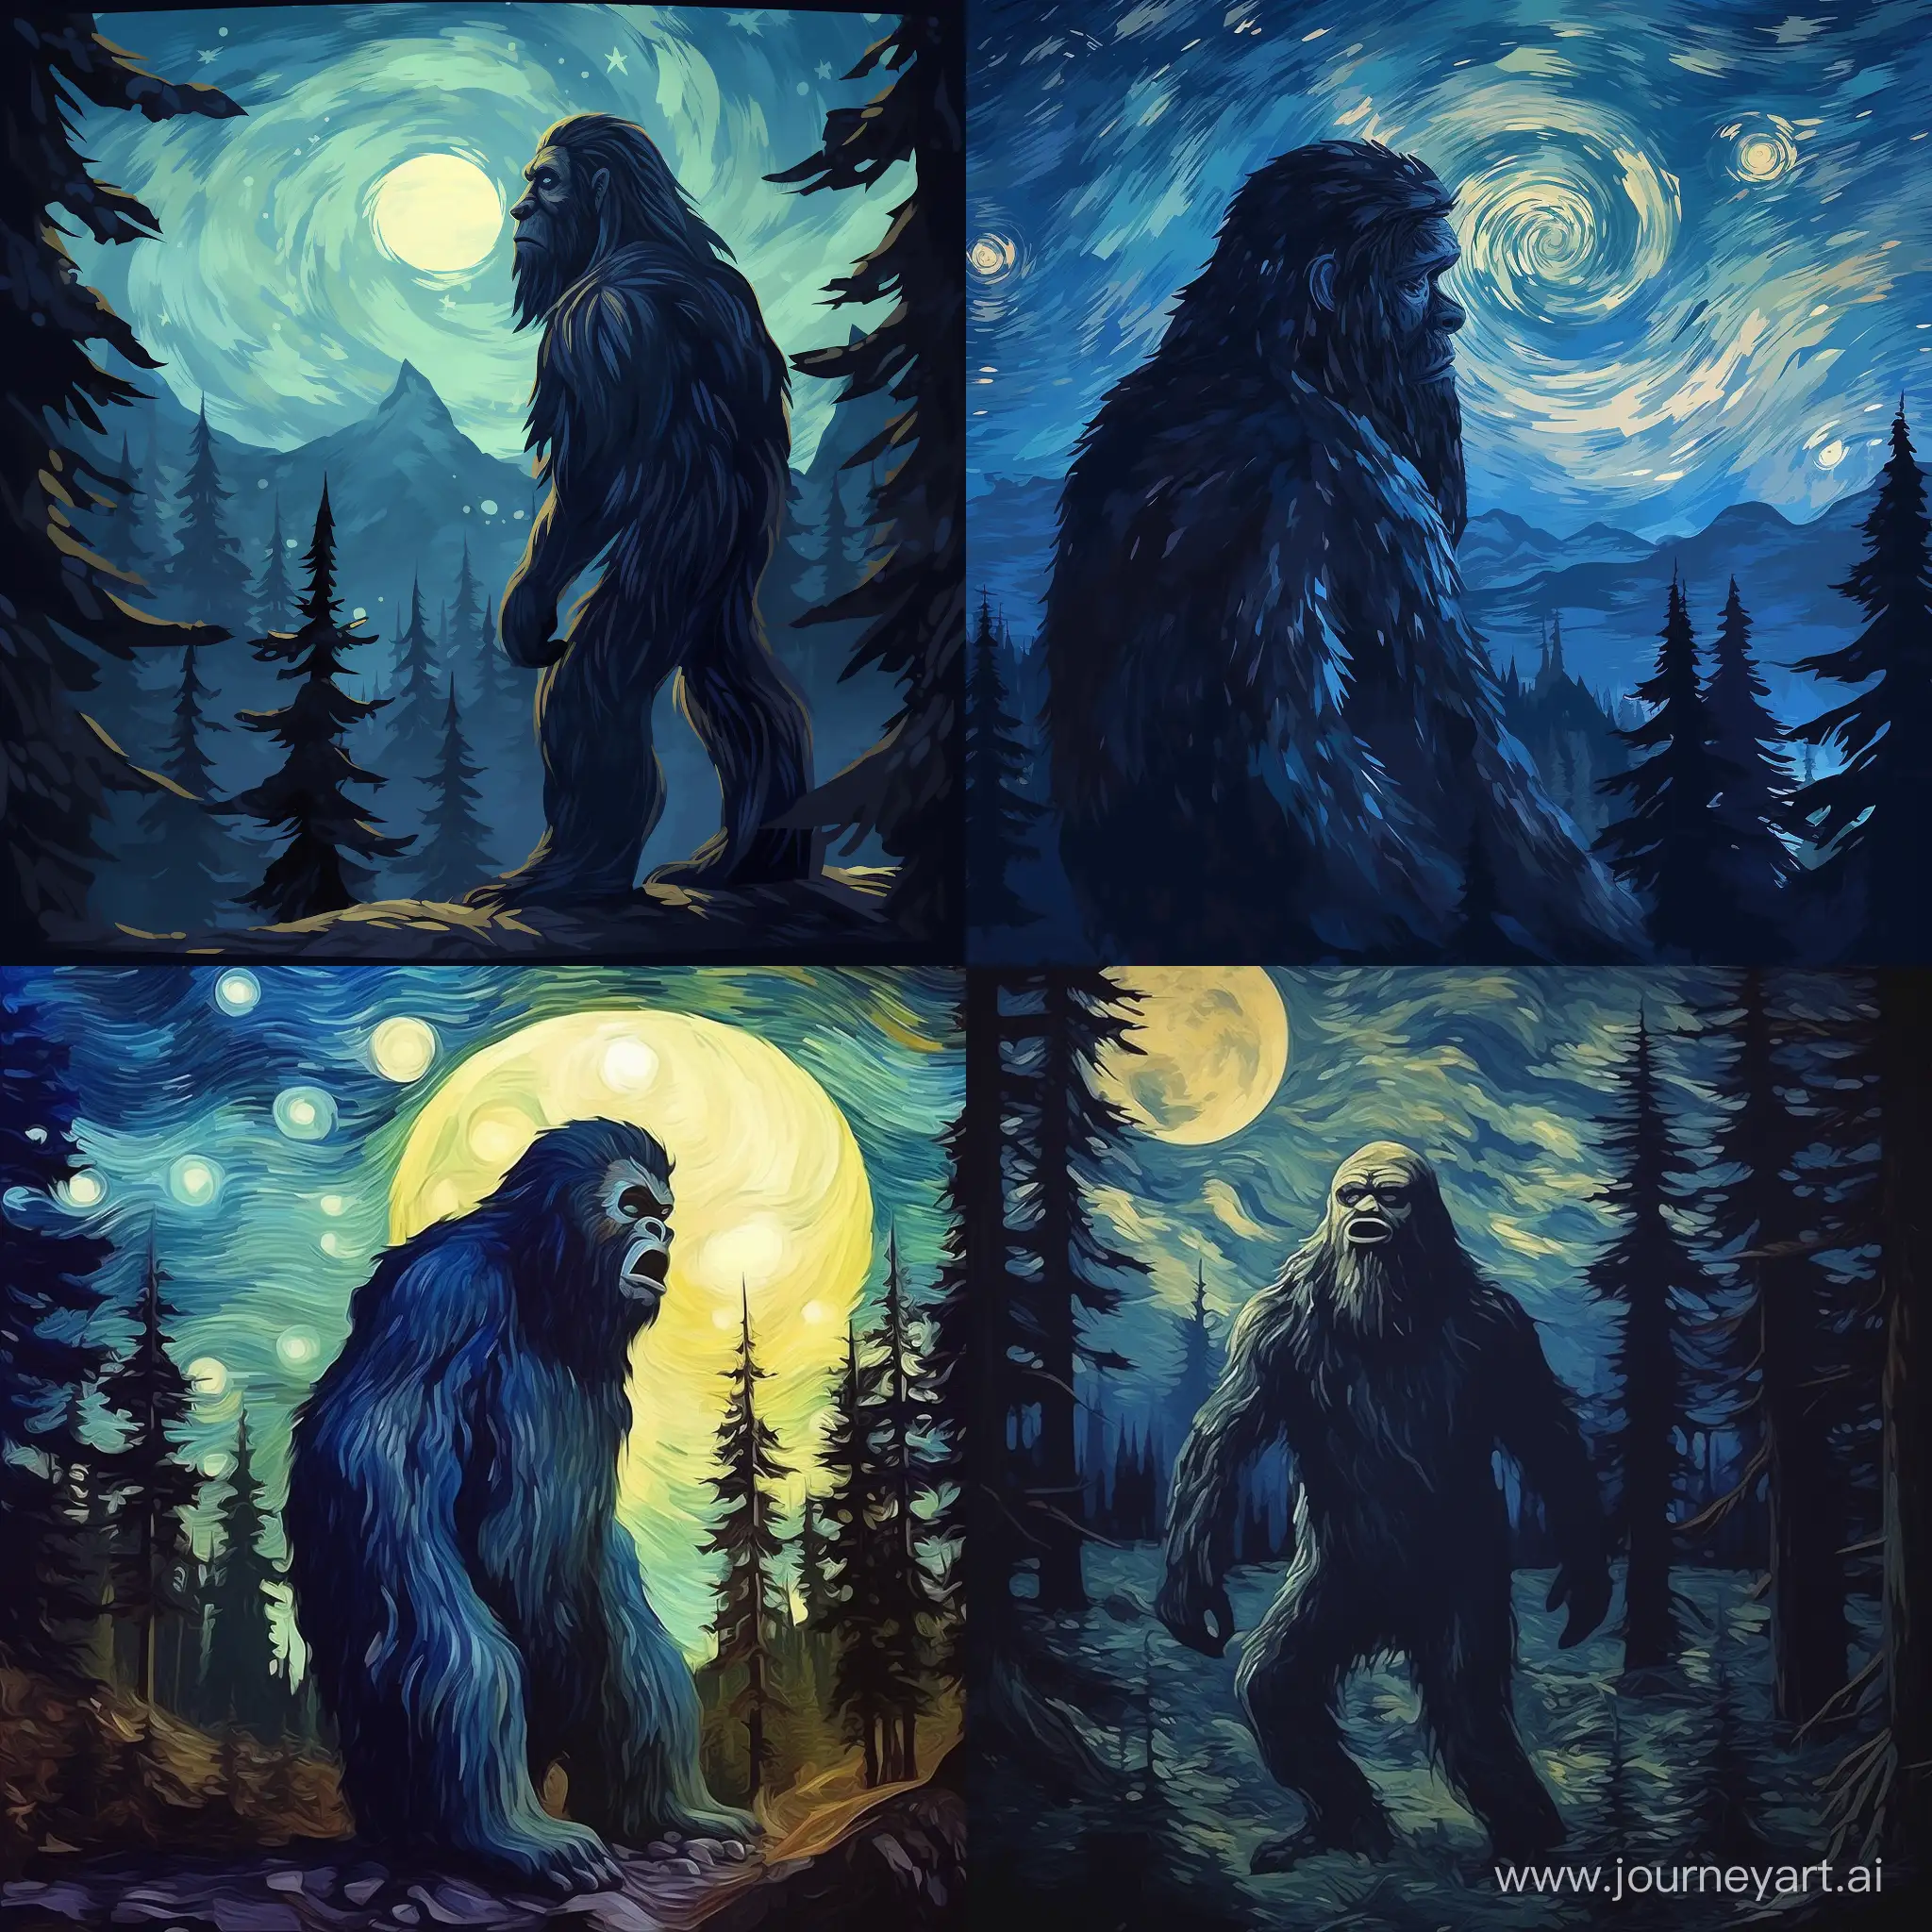 Generate an image blending Bigfoot with Van Gogh's 'The Starry Night.' Feature Bigfoot in the foreground with Van Gogh-style brushwork against a swirling night sky and moon, with pine trees silhouetted in the background, capturing the essence of the iconic painting in a forest setting